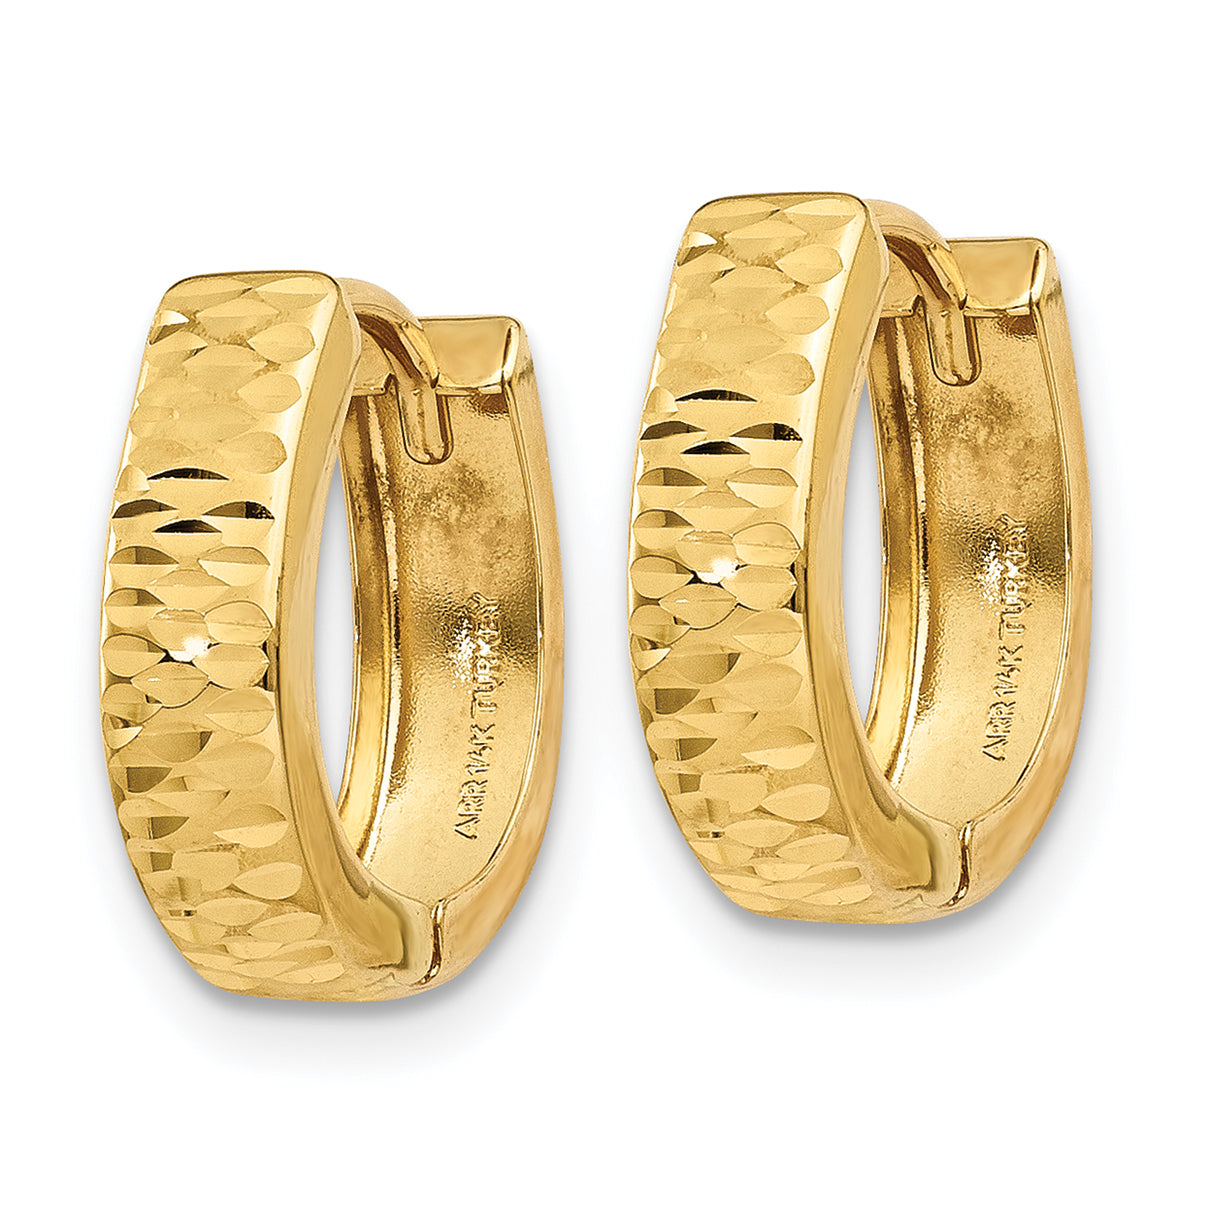 10k Gold Textured and Polished Hinged Hoop Earrings